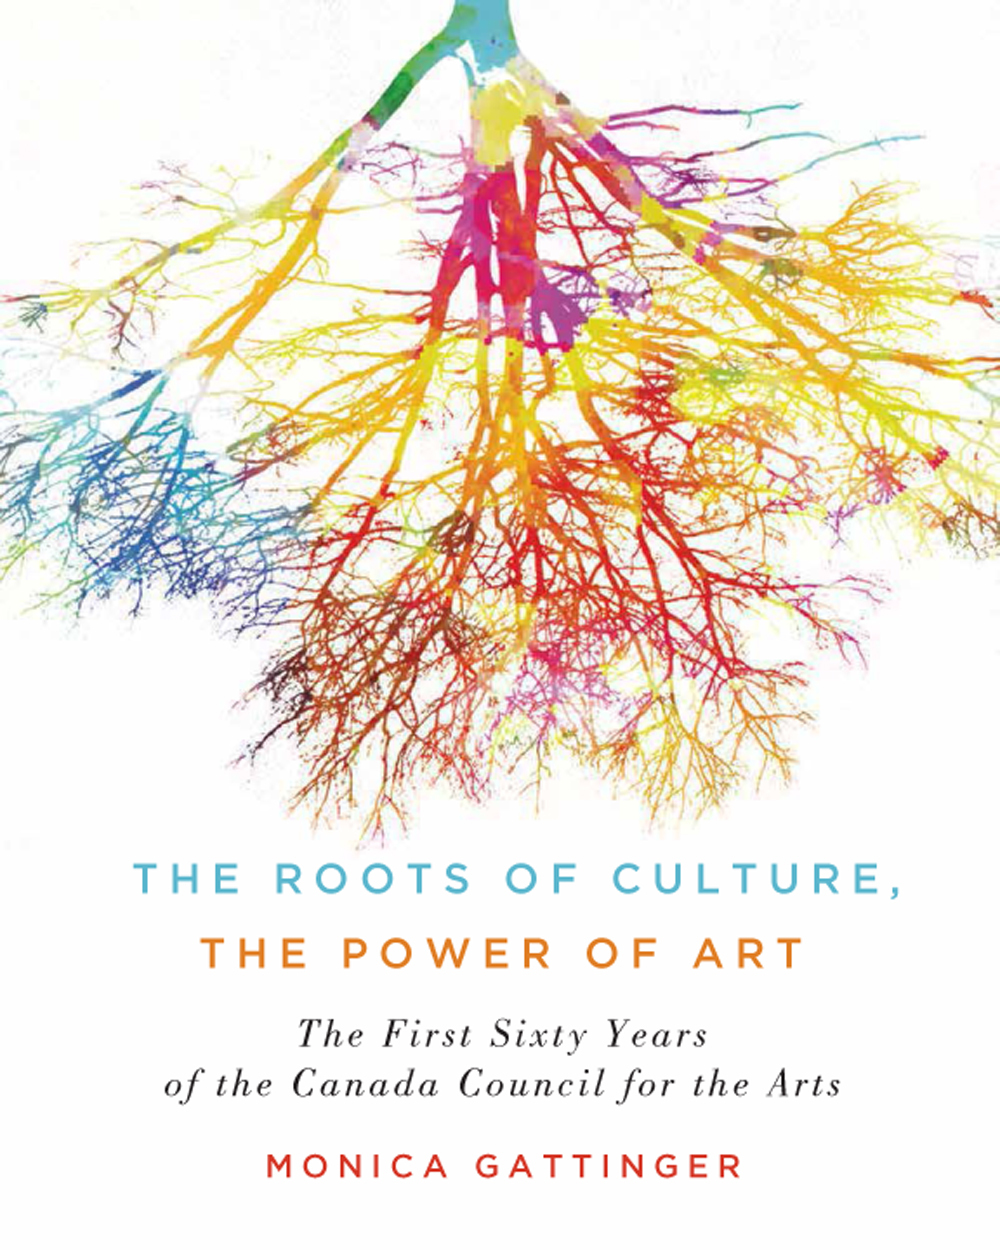 The Roots of Culture, the Power of Art